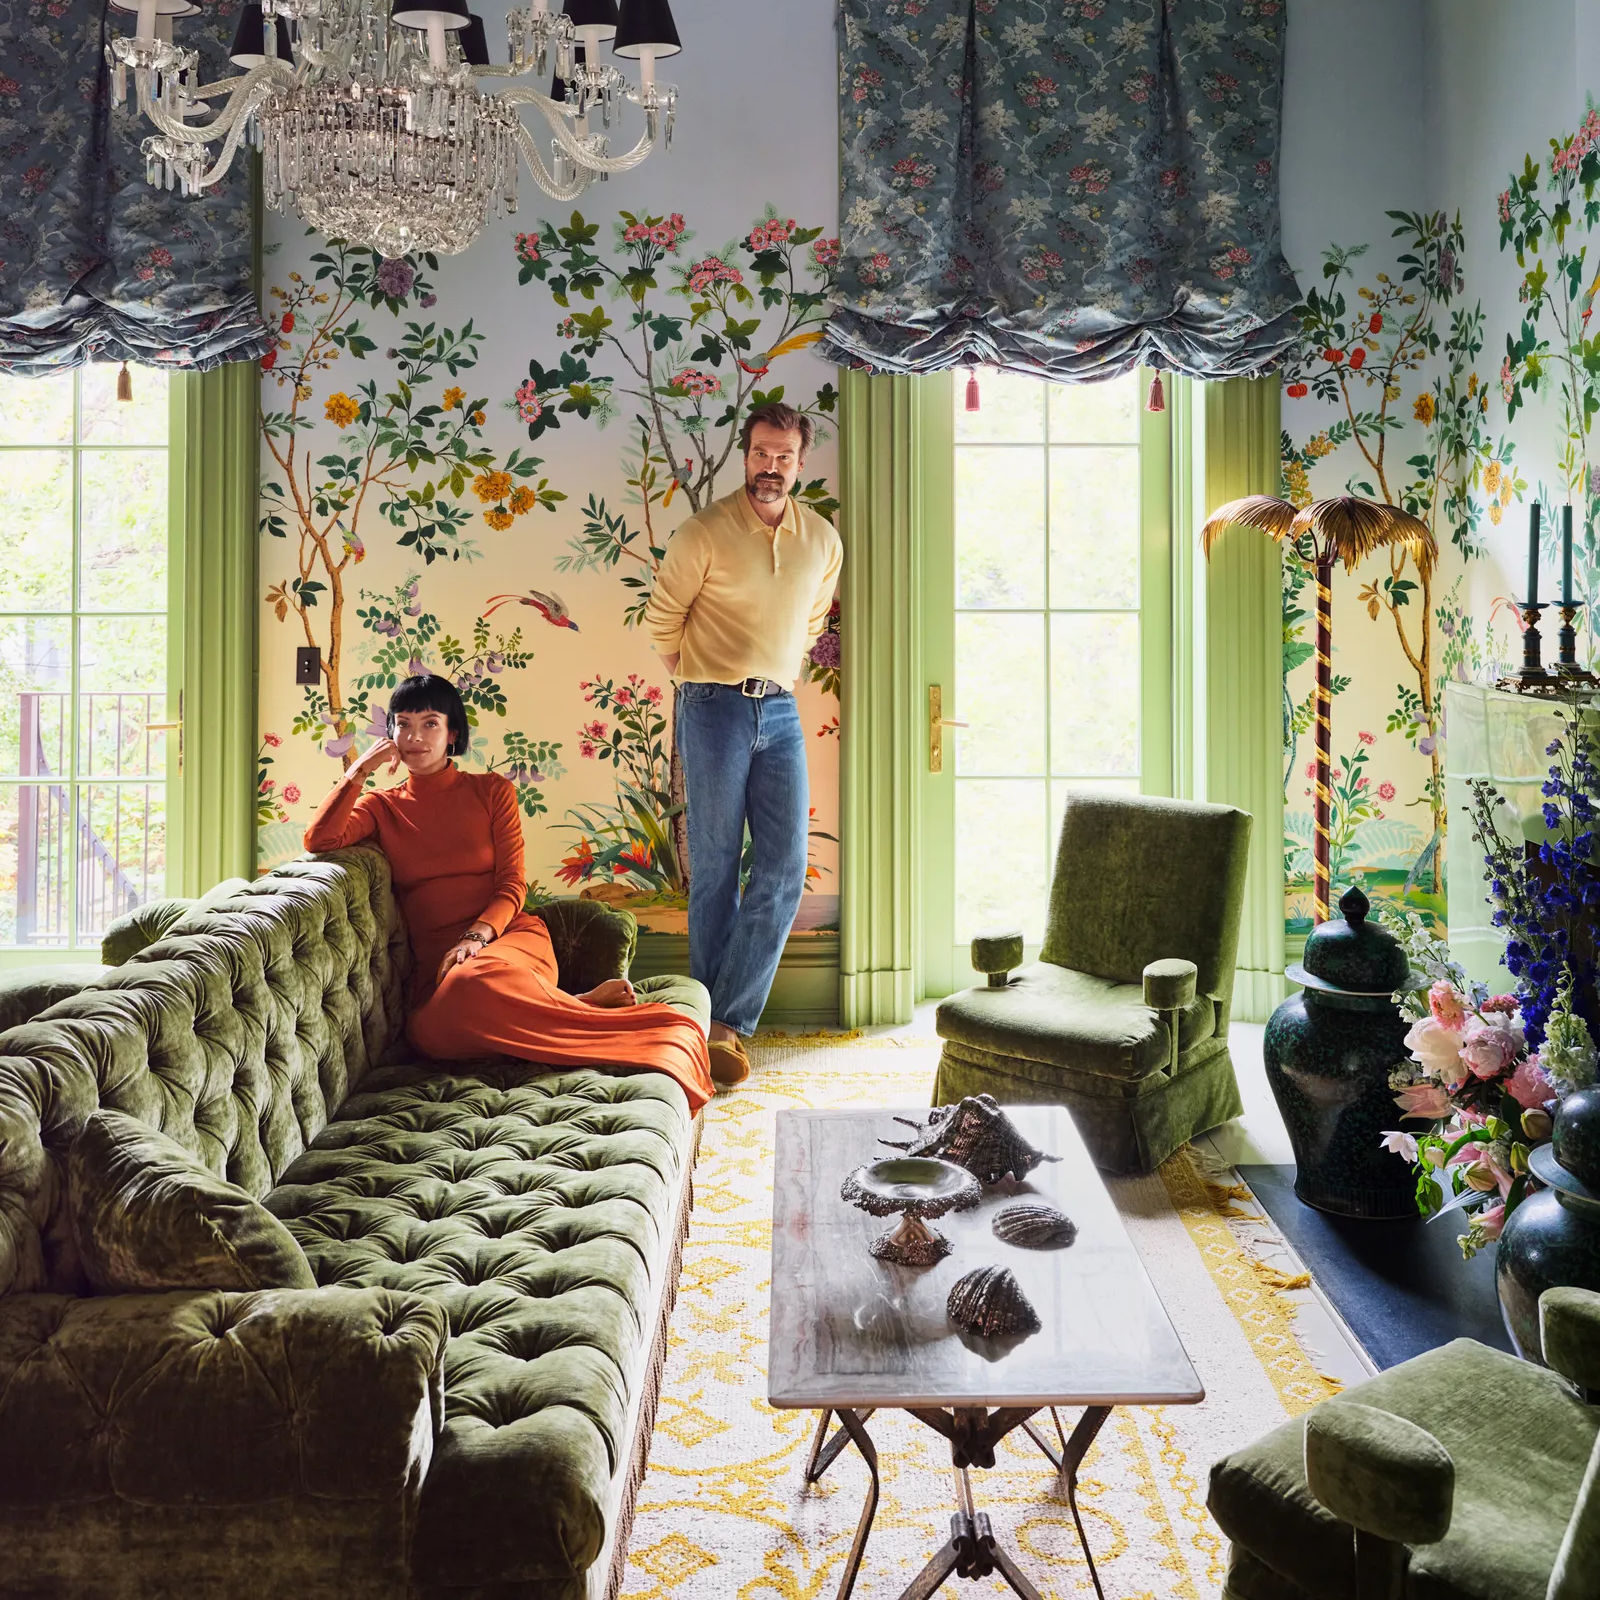 David Harbour and Lily Allen at their maximalist home living room